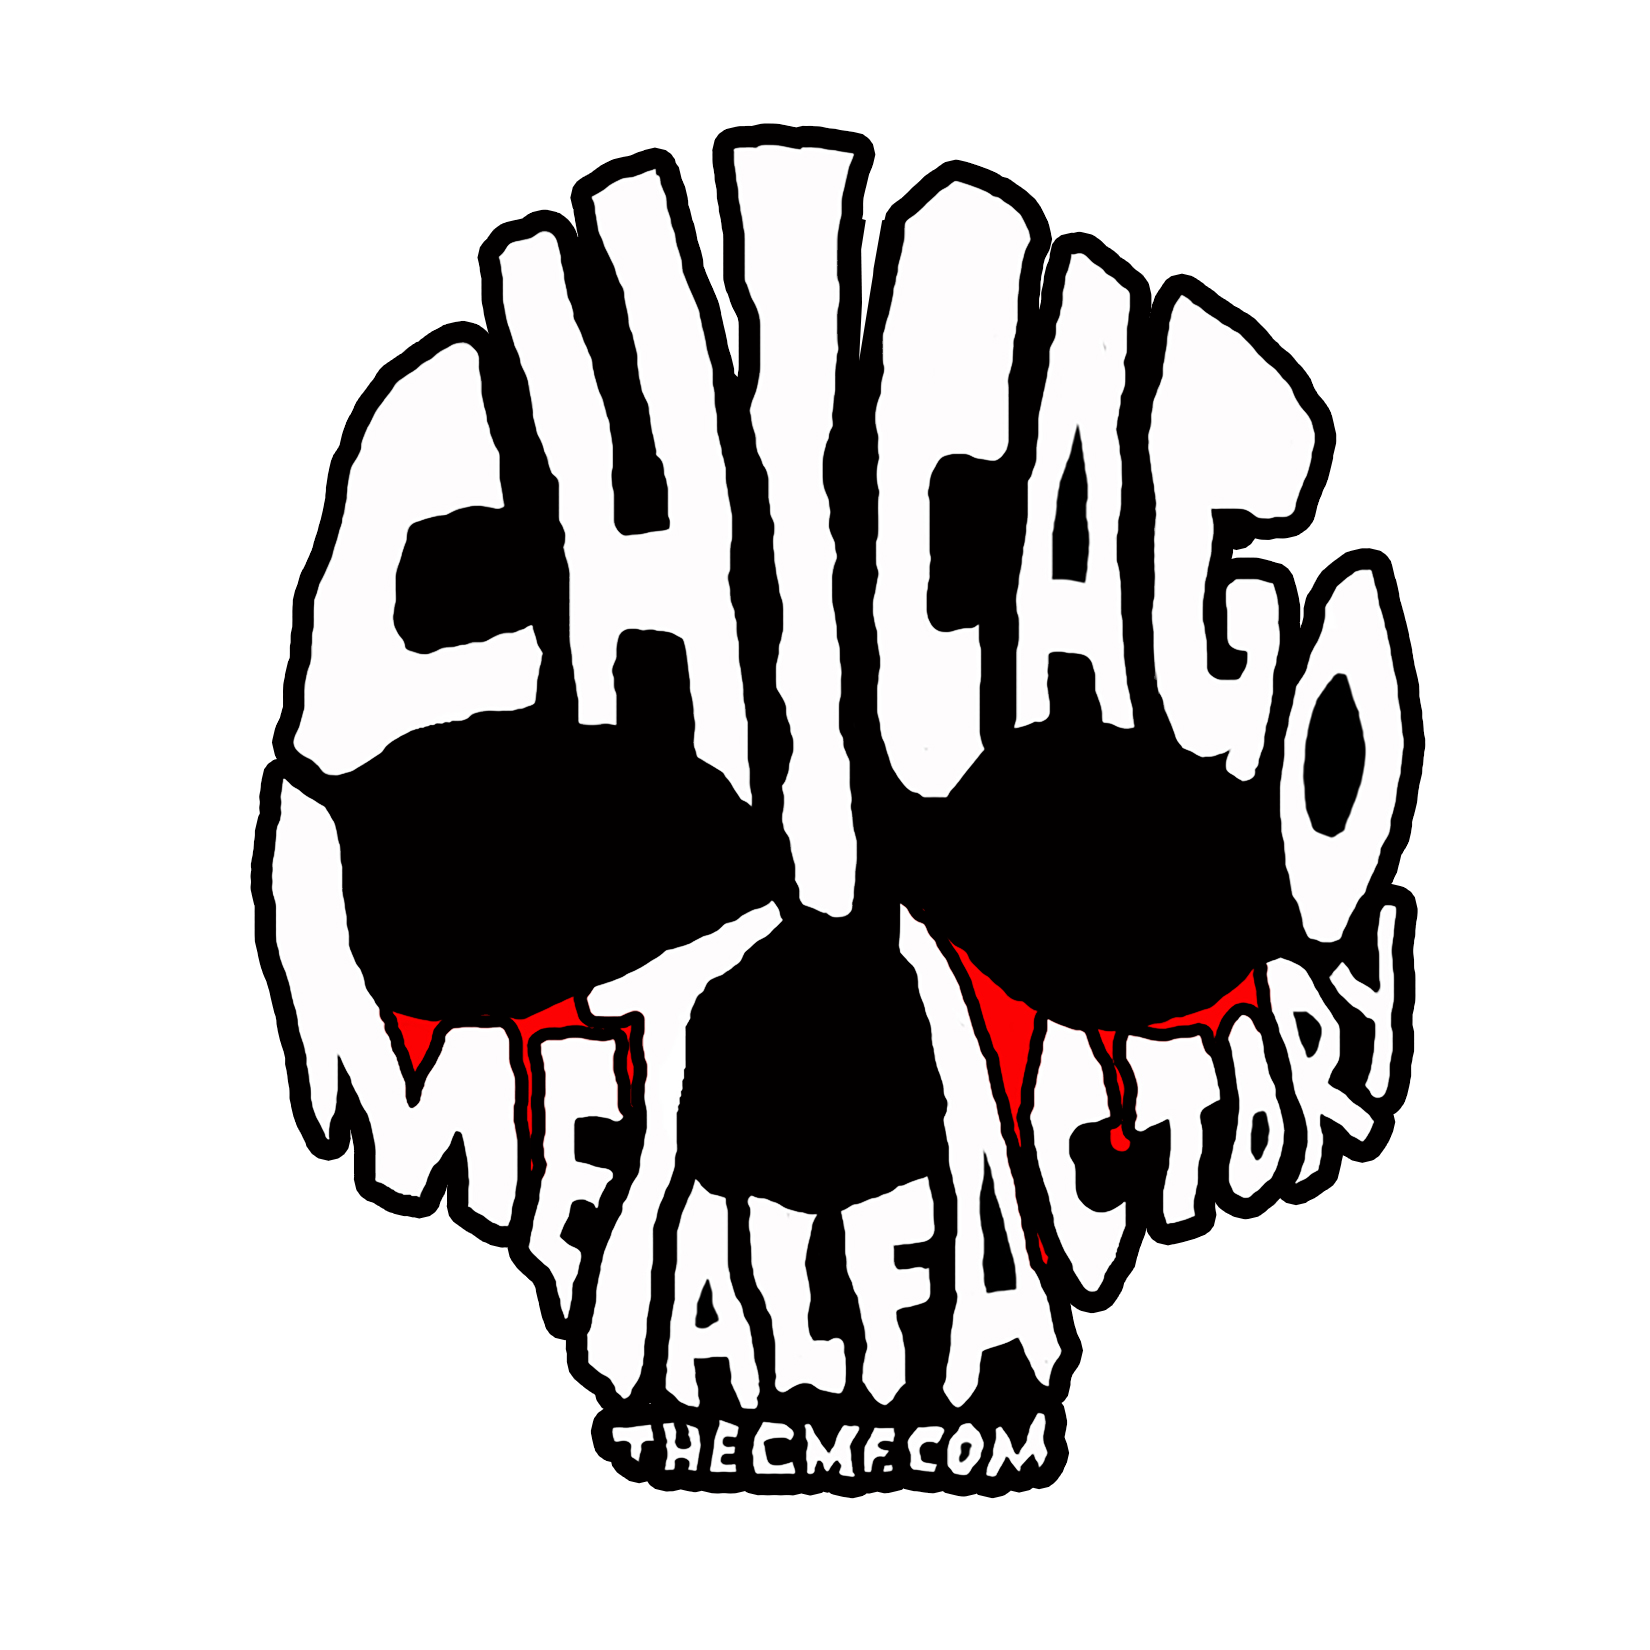 Chicago Metal Factory